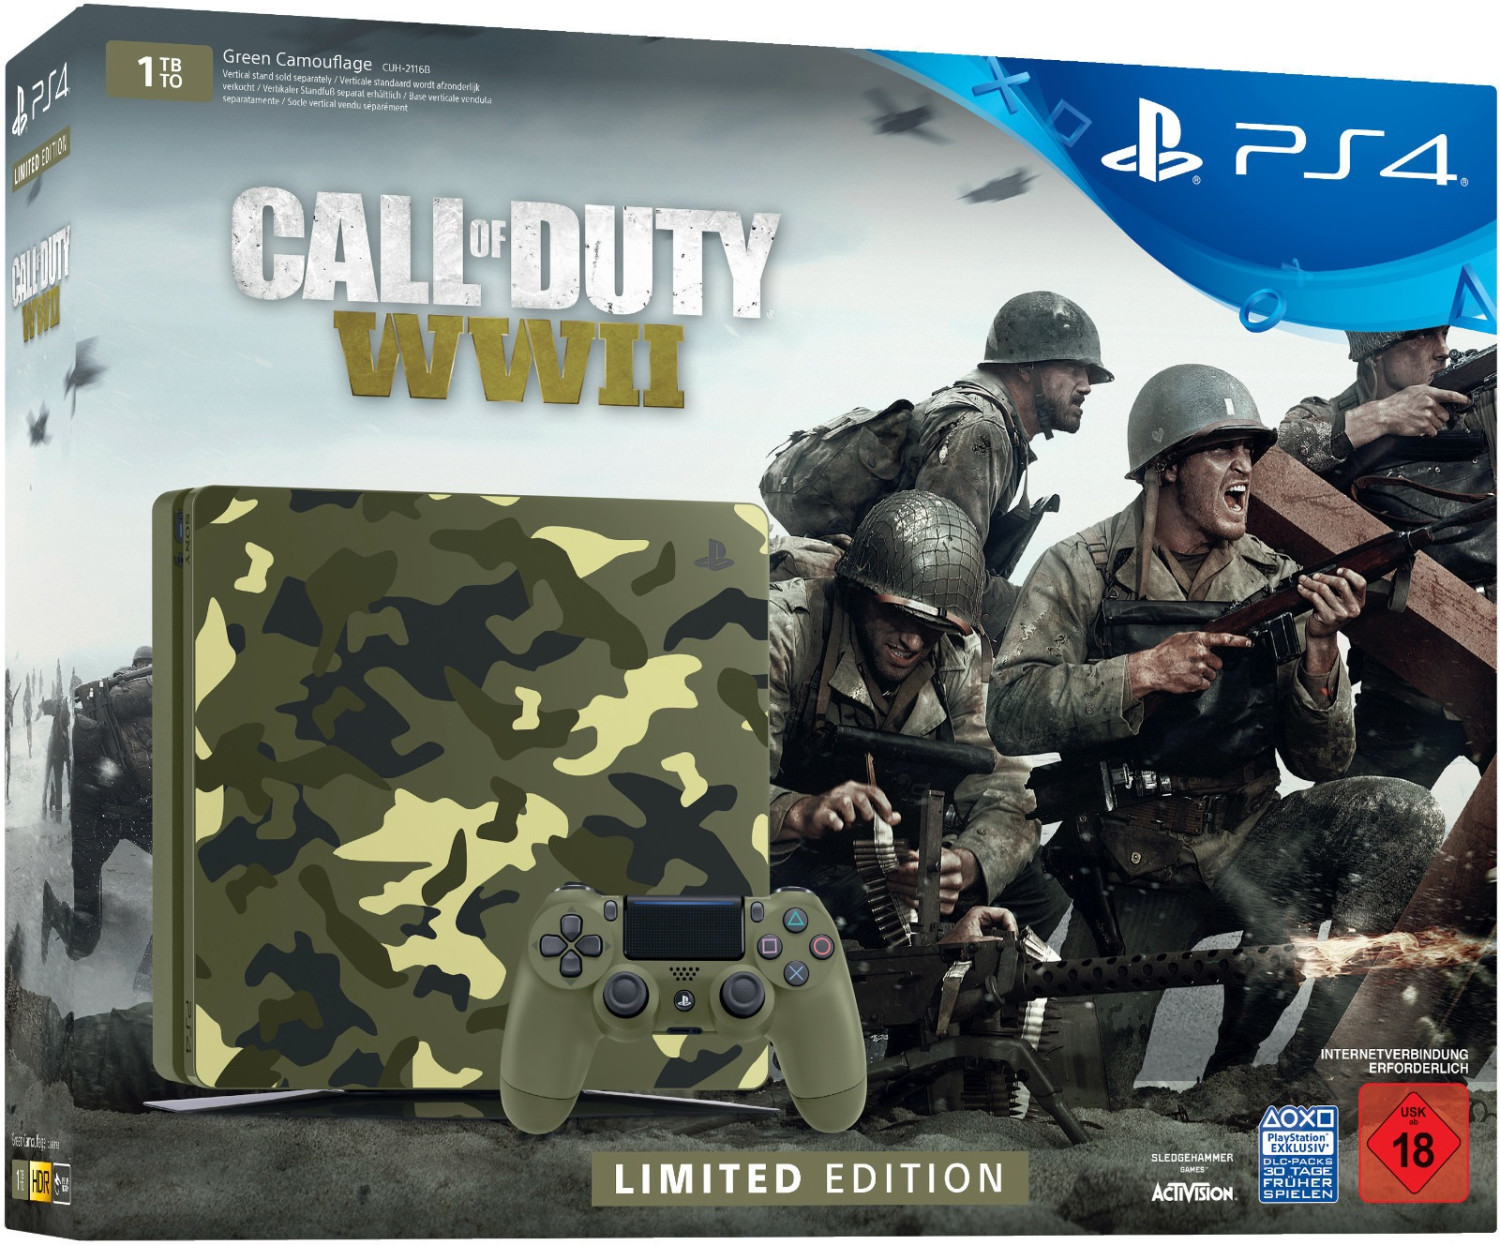 Sony PlayStation 4 (PS4) Slim 1TB - Call of Duty: WWII Limited Edition